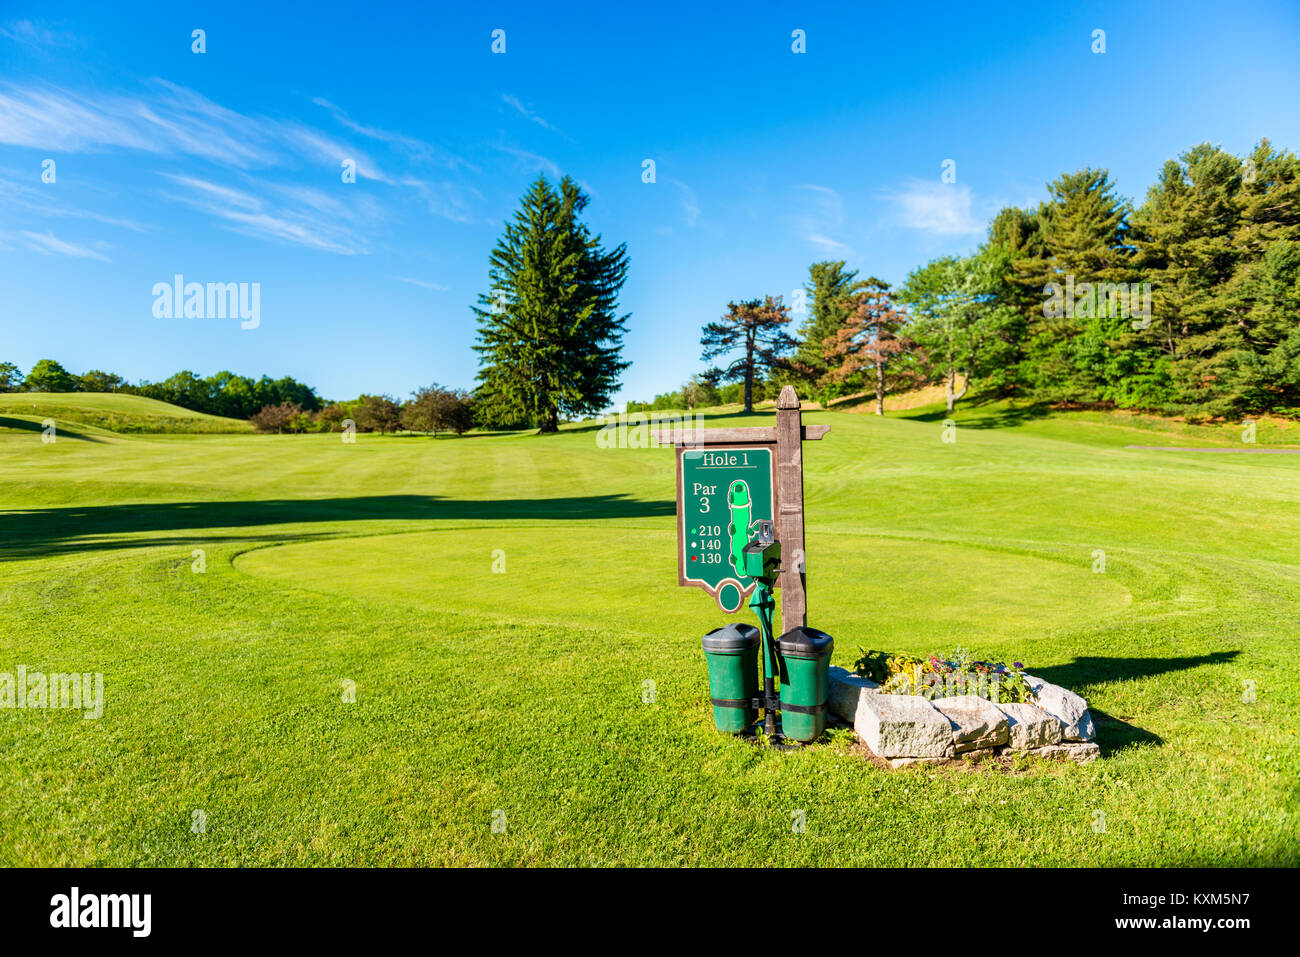 Tee at First Hole of Golf Course in Upstate New York, USA Stock Photo